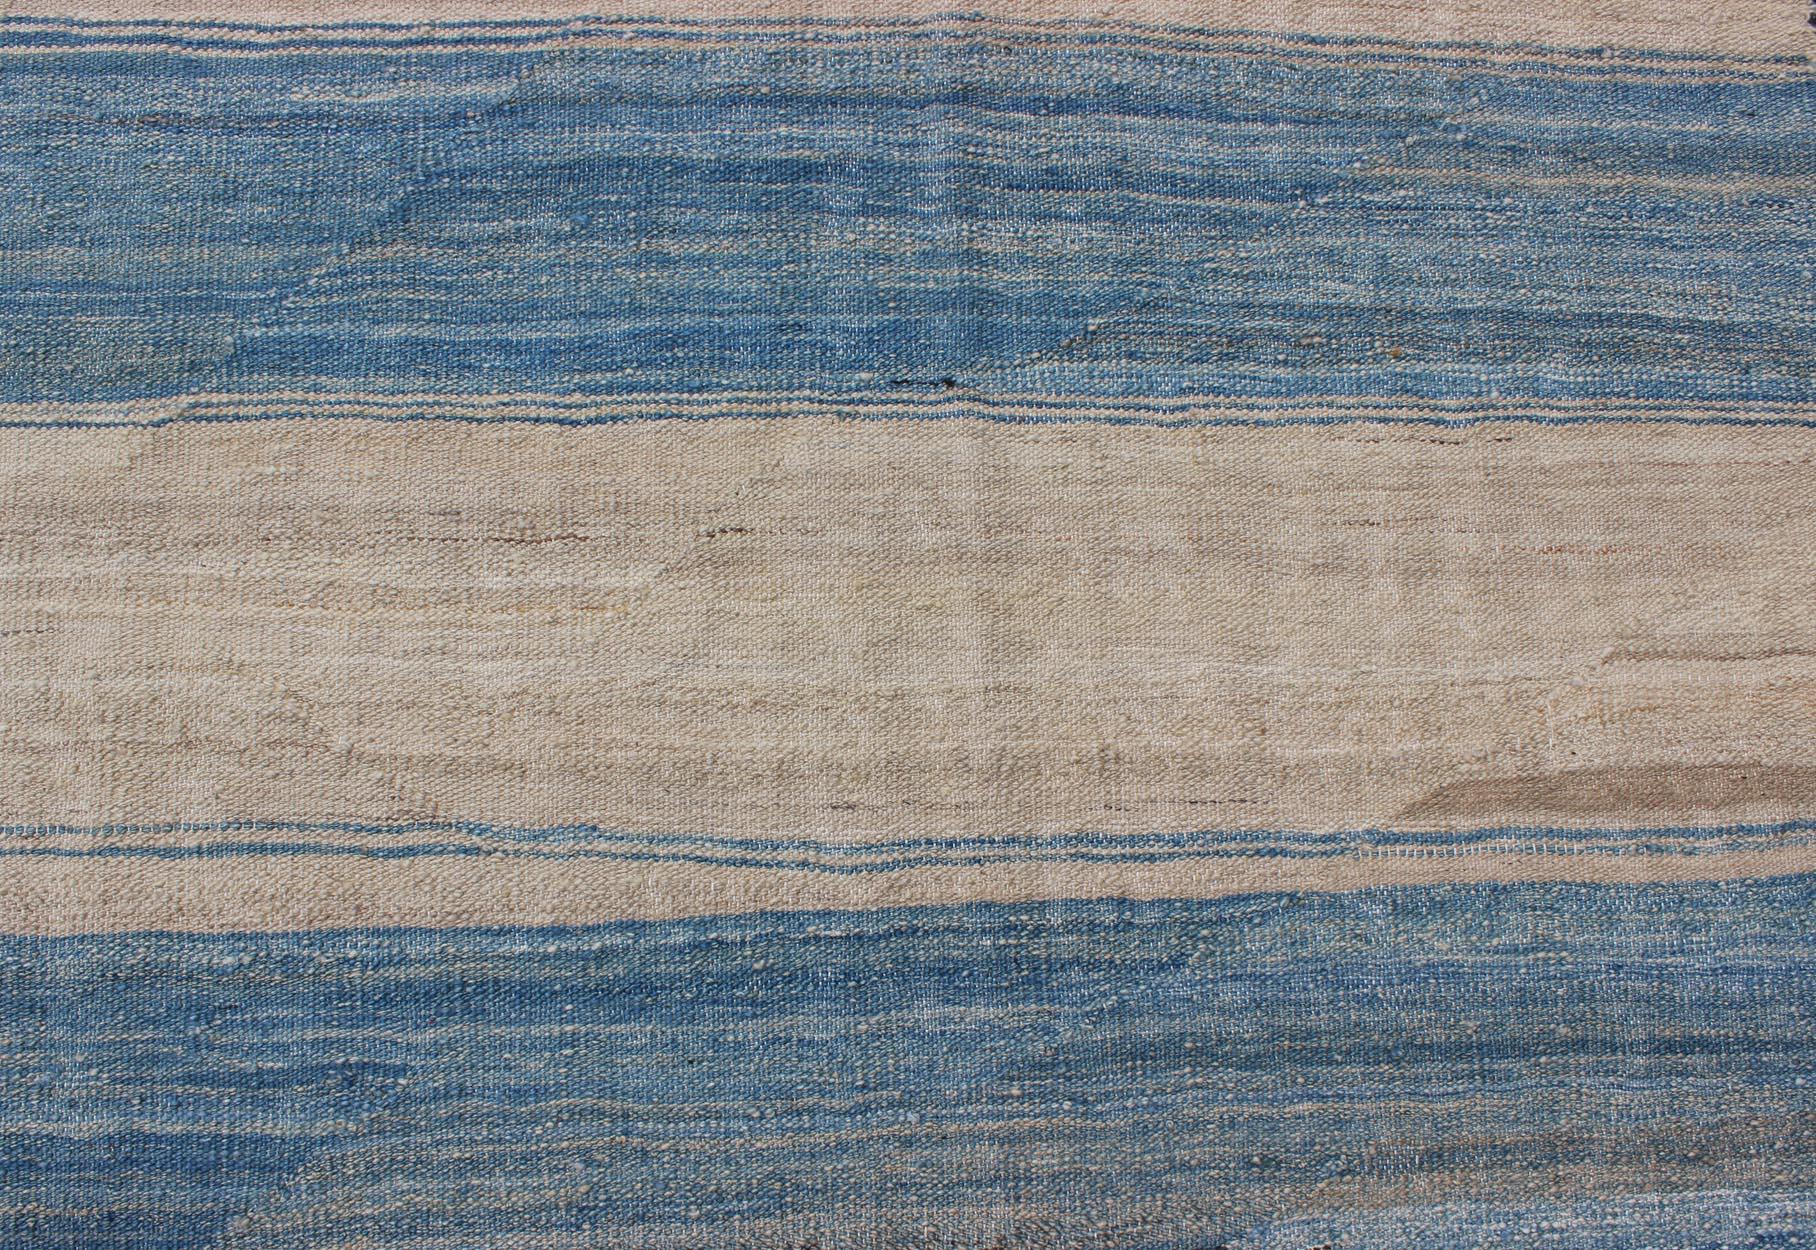 Hand-Woven Flat-Weave Kilim Rug with Classic Stripe Design in Blue, Ivory, Charcoal